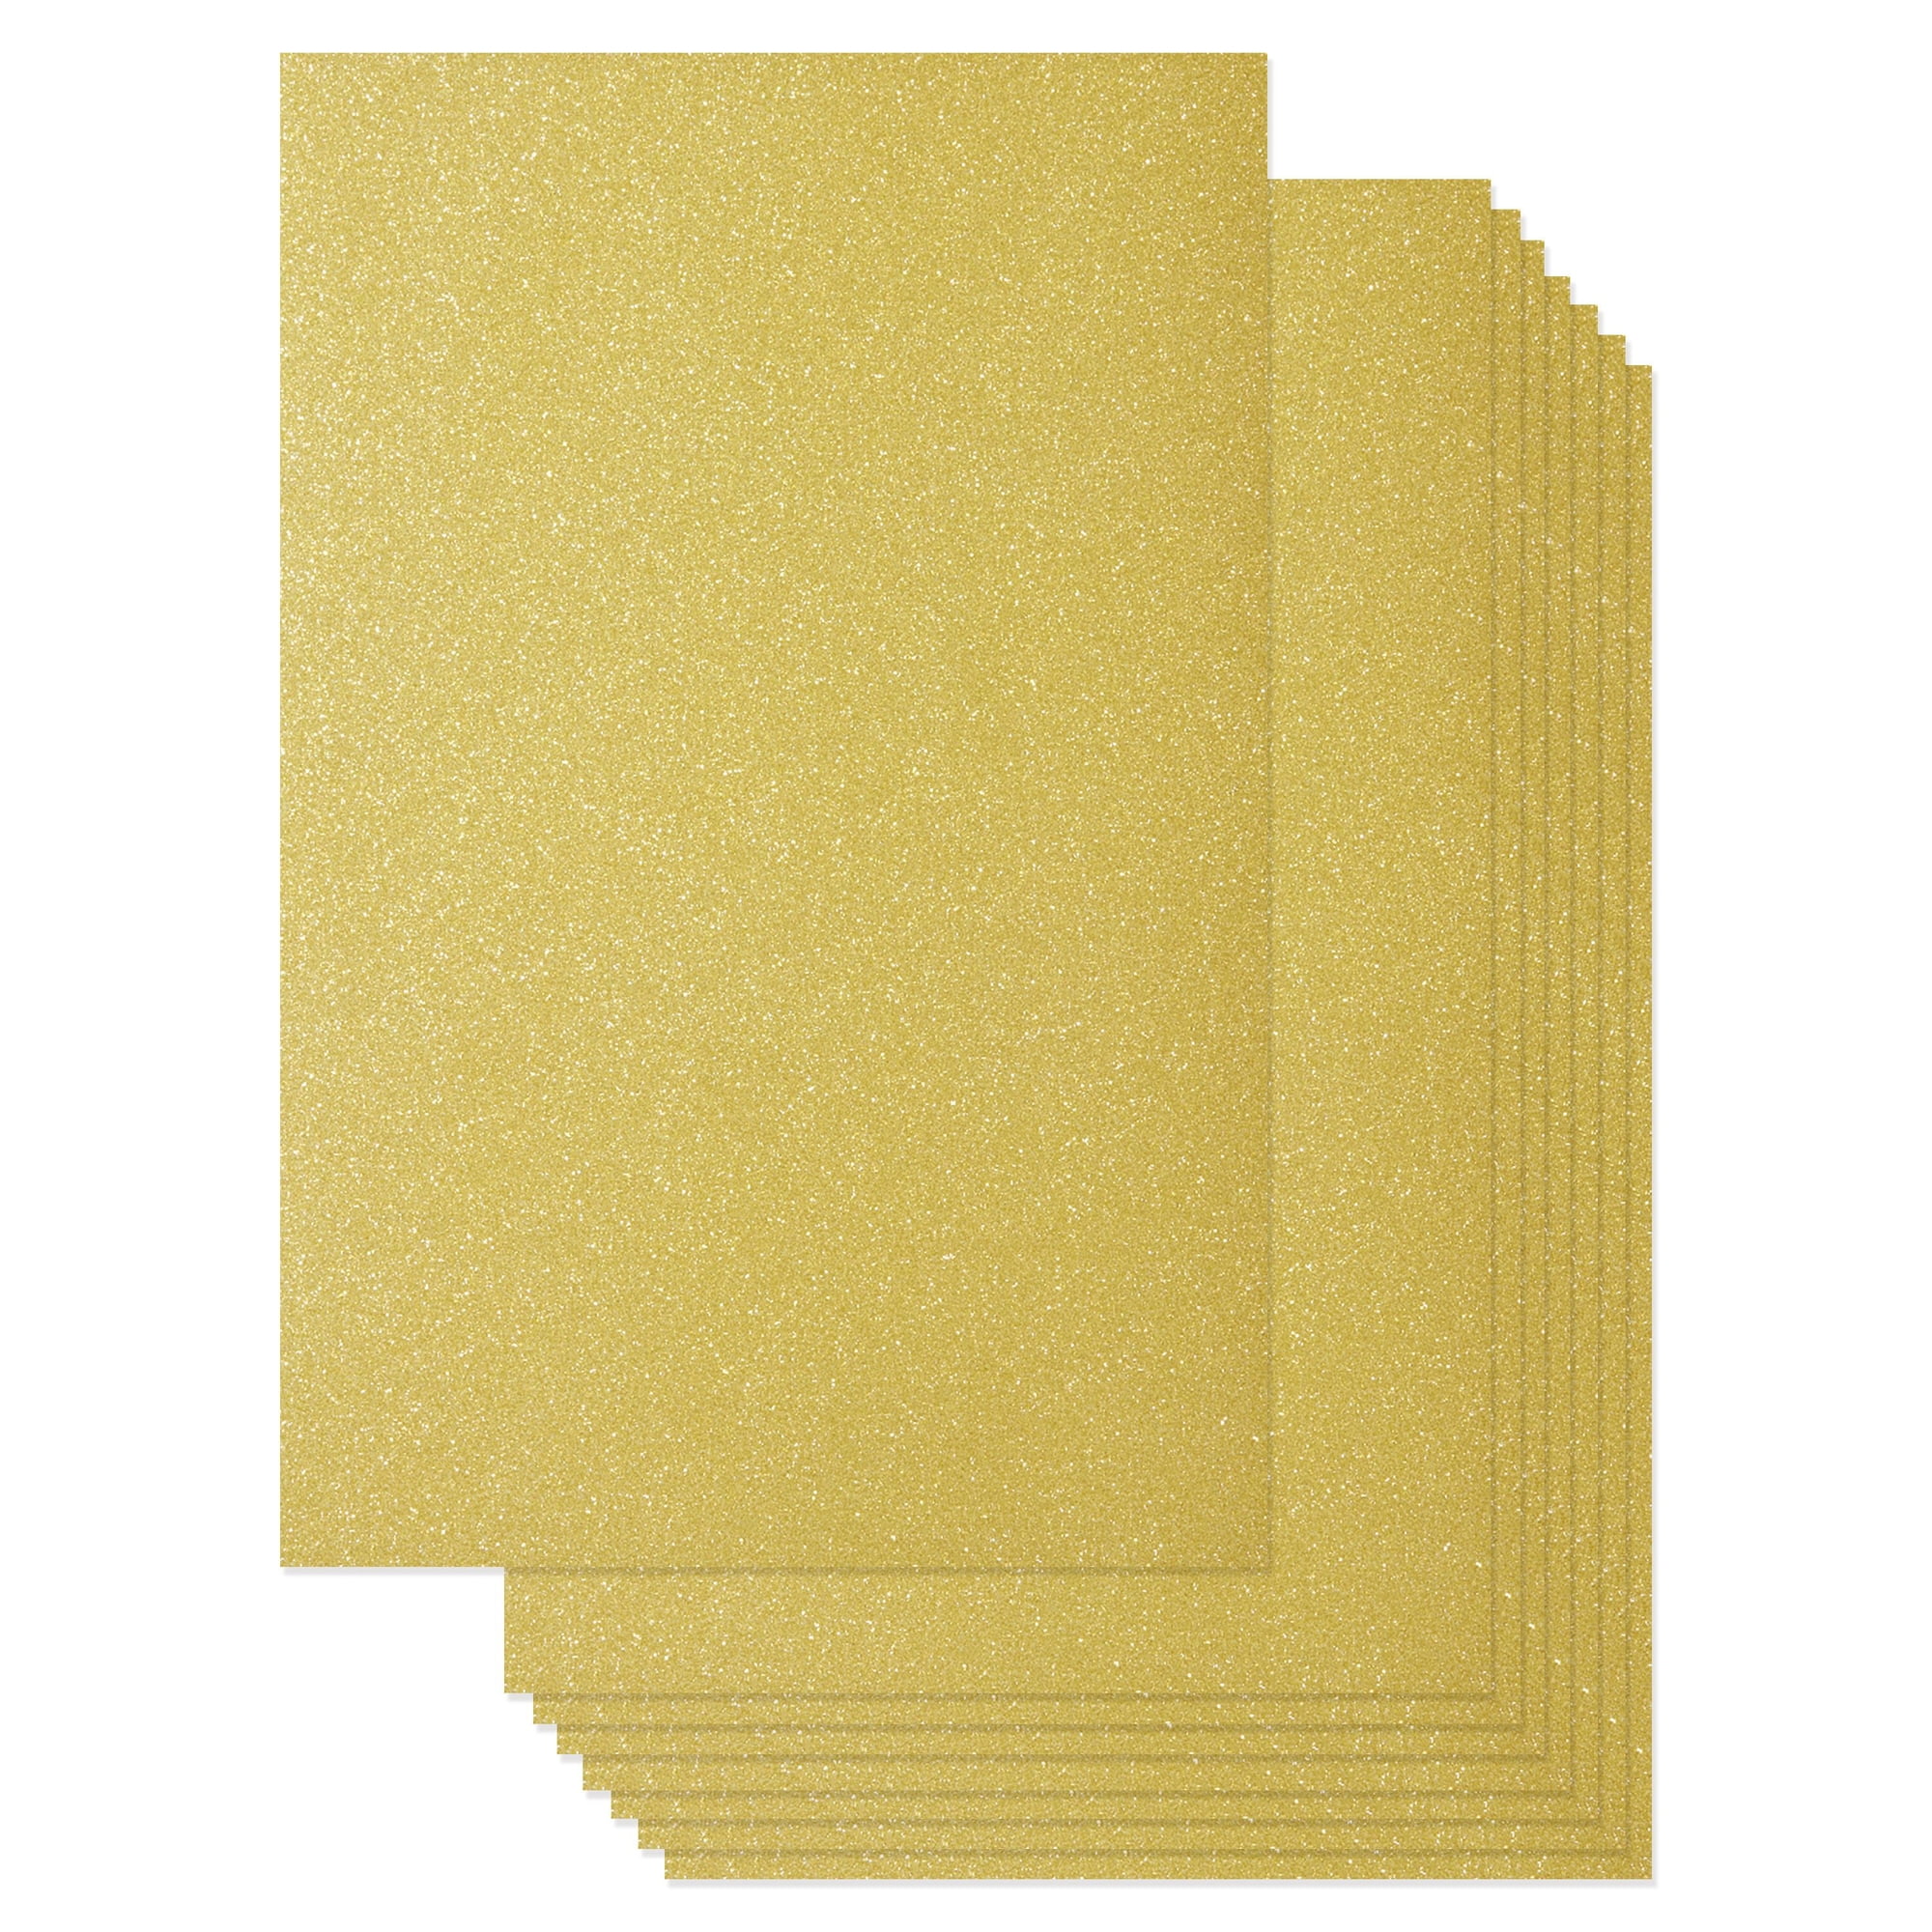 Gondiane 24 sheets Yellow Cardstock Paper 8.5 x 11 Inches for DIY Cards,  Invitations, Scrapbooking and Other Crafts(250gsm/92lb)